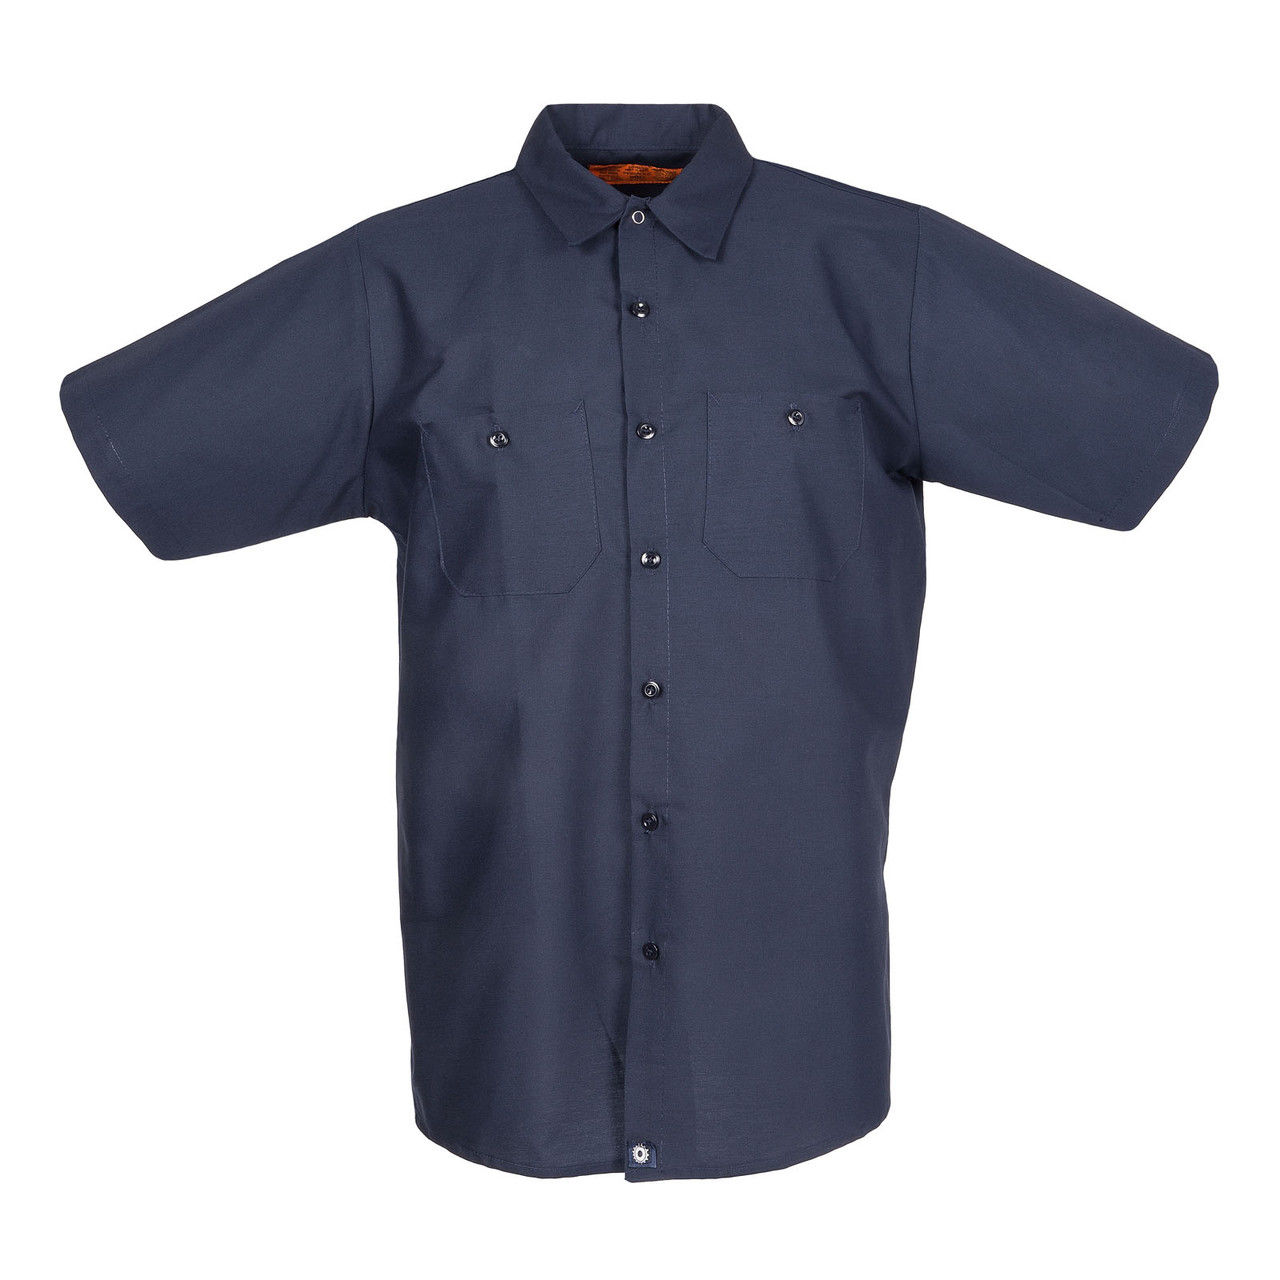 Will the mens navy blue short sleeve shirt's color fade and what is its hue?